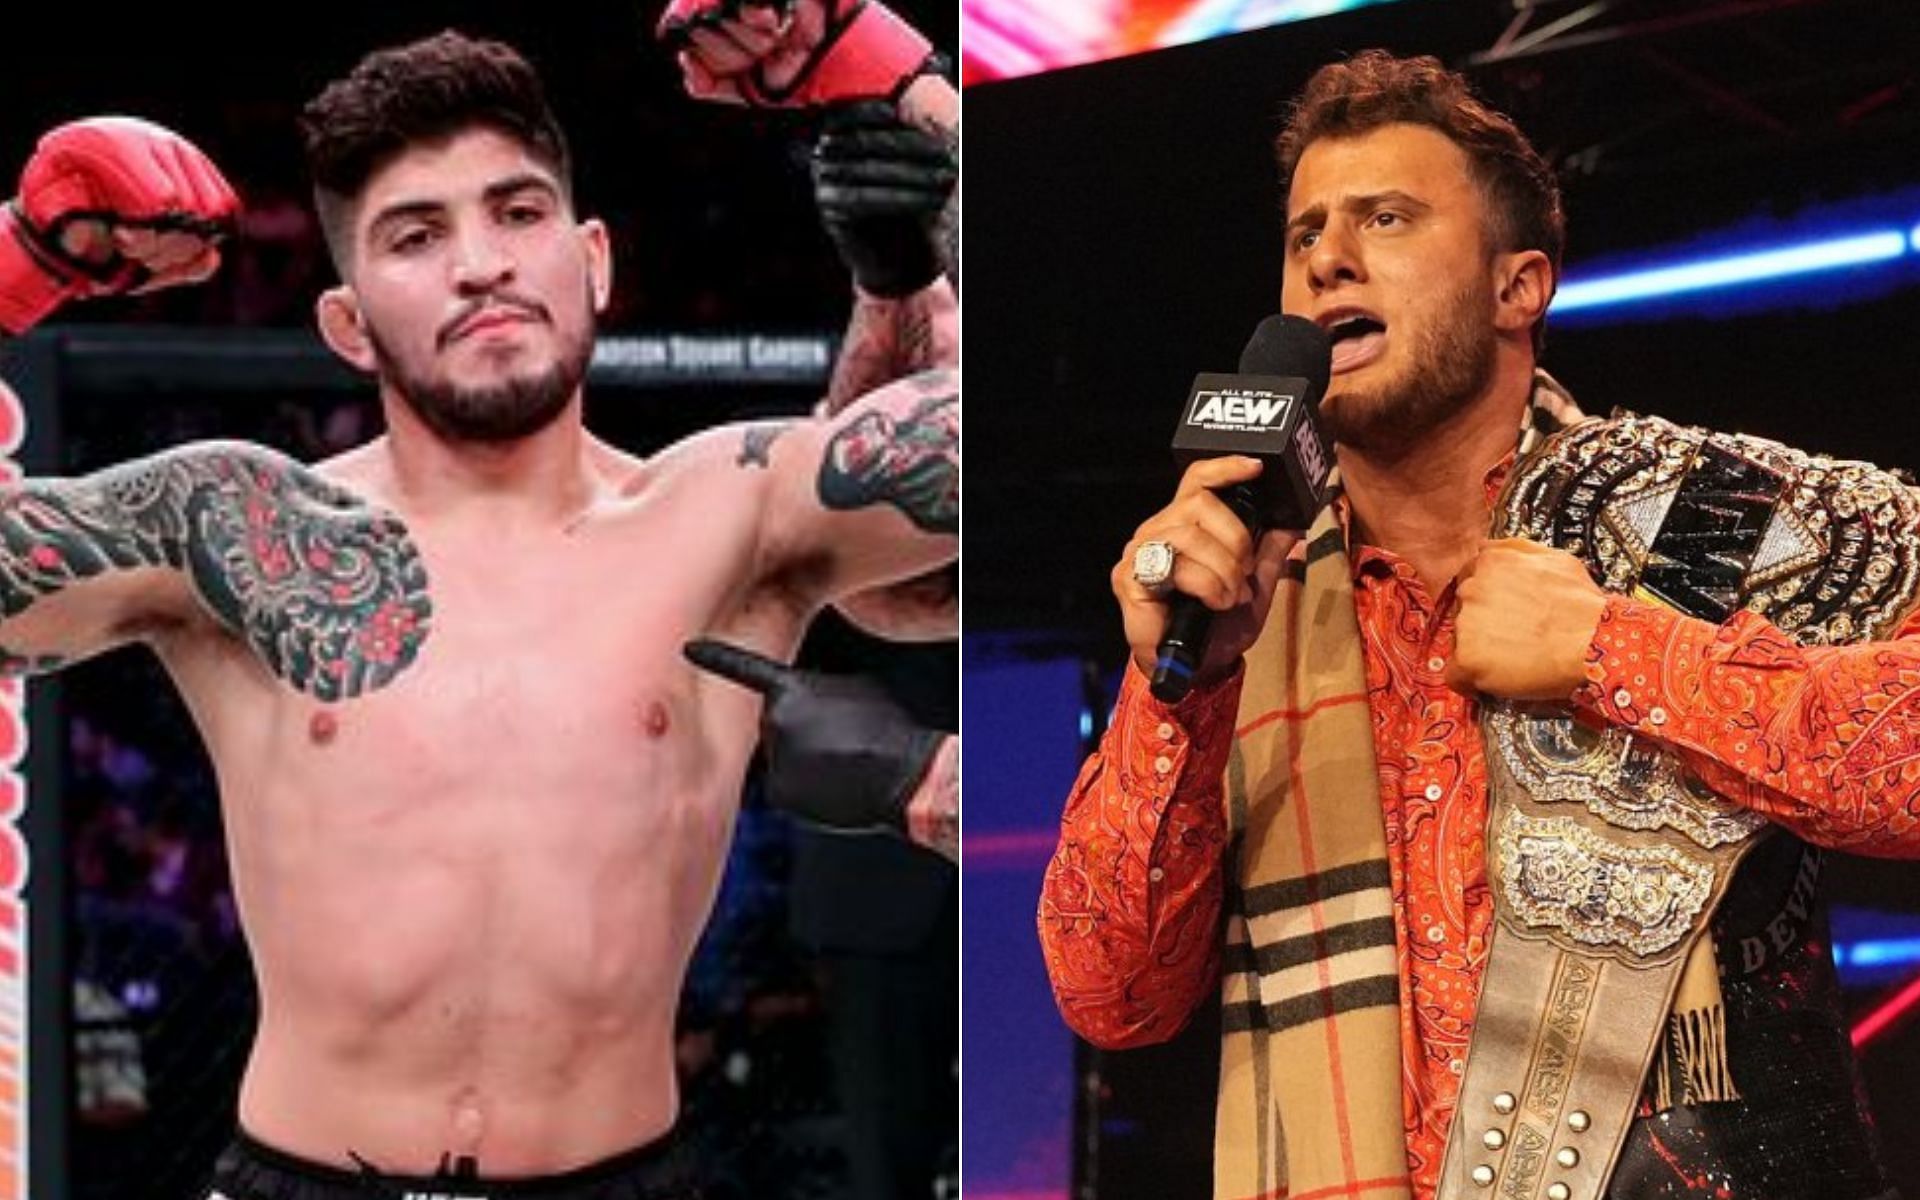 Dillon Danis [Left], and MJF [Right] [Photo credit: Bellator MMA, and @AEWonTV - Twitter]